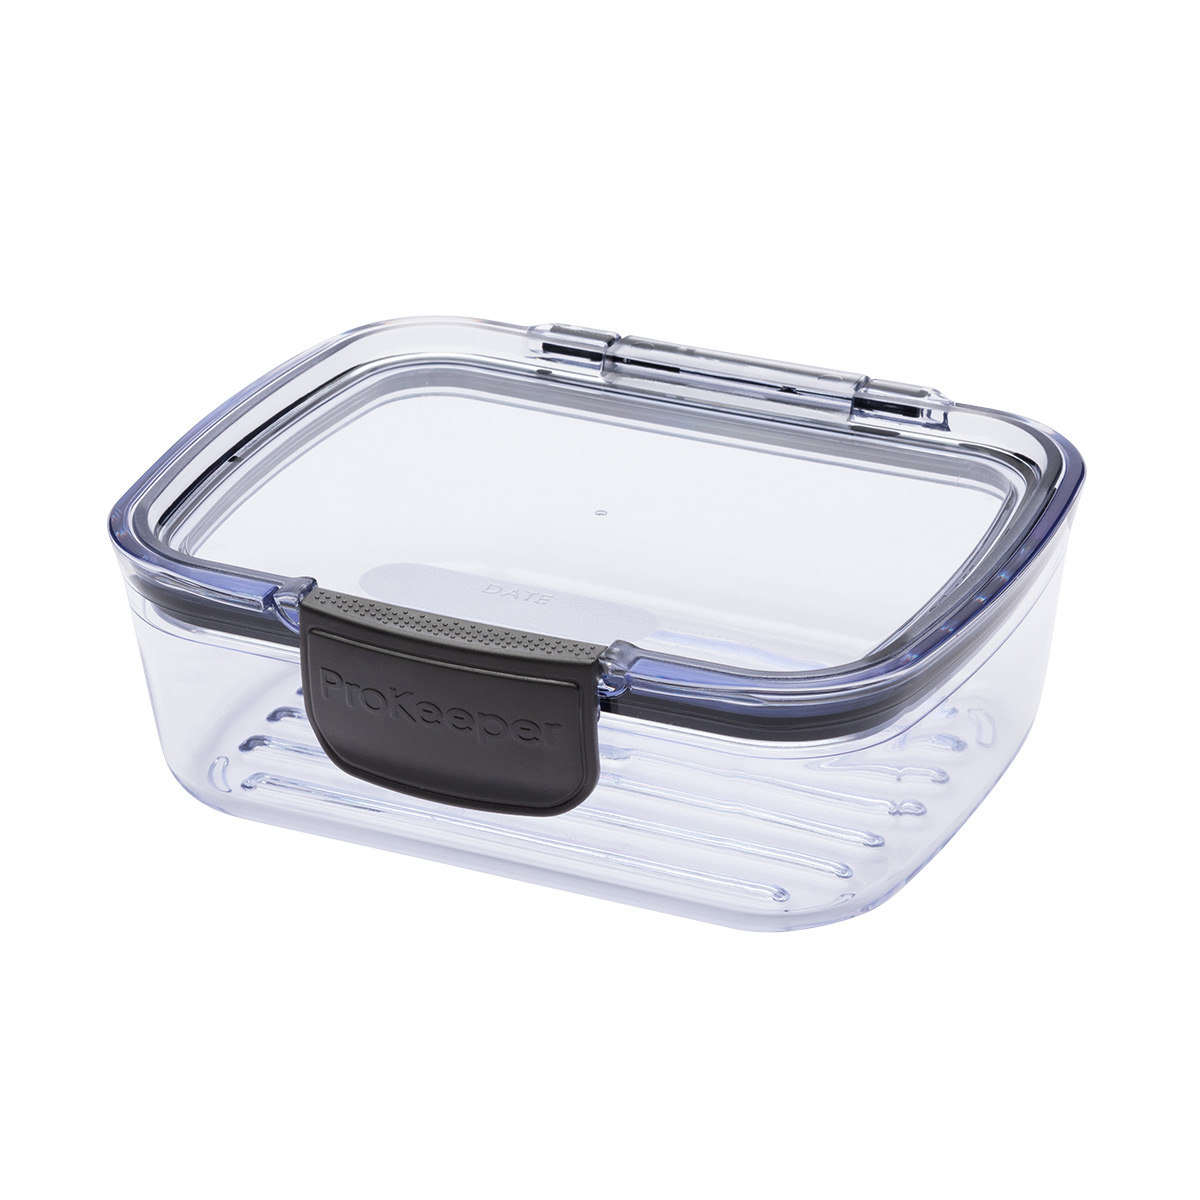 Prepworks ProKeeper Deli Container | The Container Store